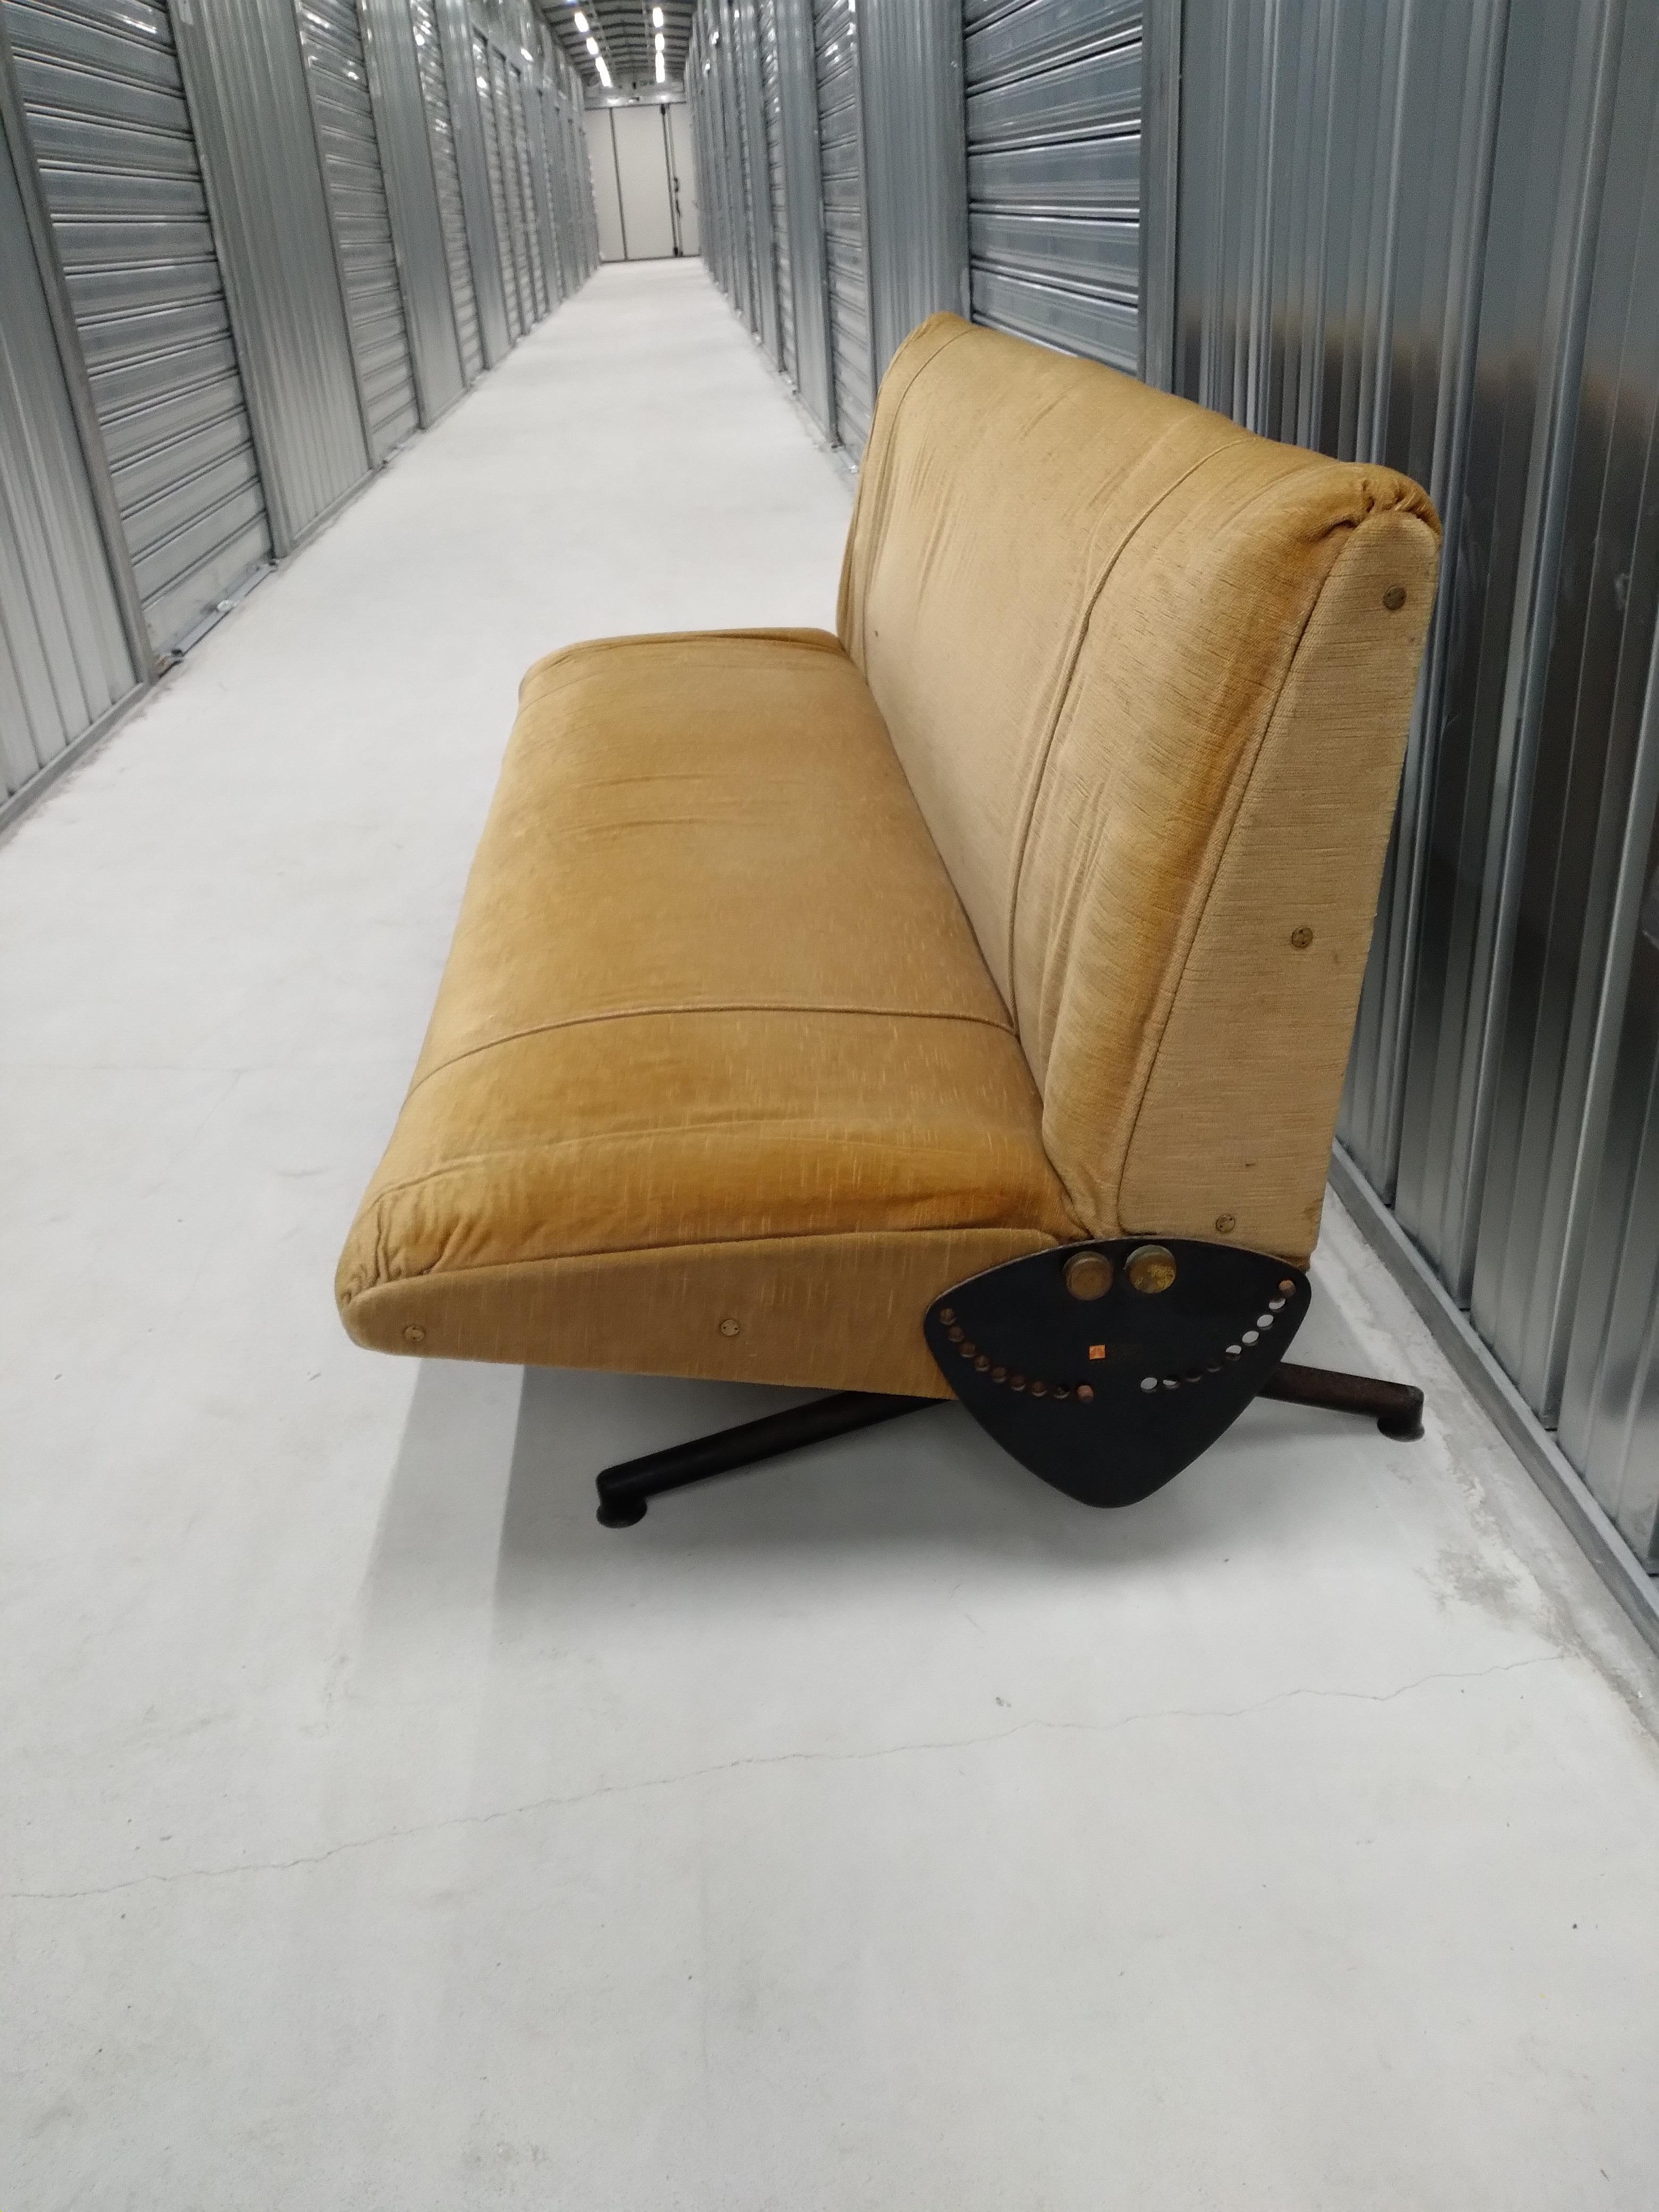 D70 Sofa by Osvaldo Borsani from Tecno Italy 1955s. The iconic sofa. Awards TRIENNALE of Milan in the 1954s. This is the first edition, is all original, the velvet is original, is in good condition is complete and fully functional and perfect. This